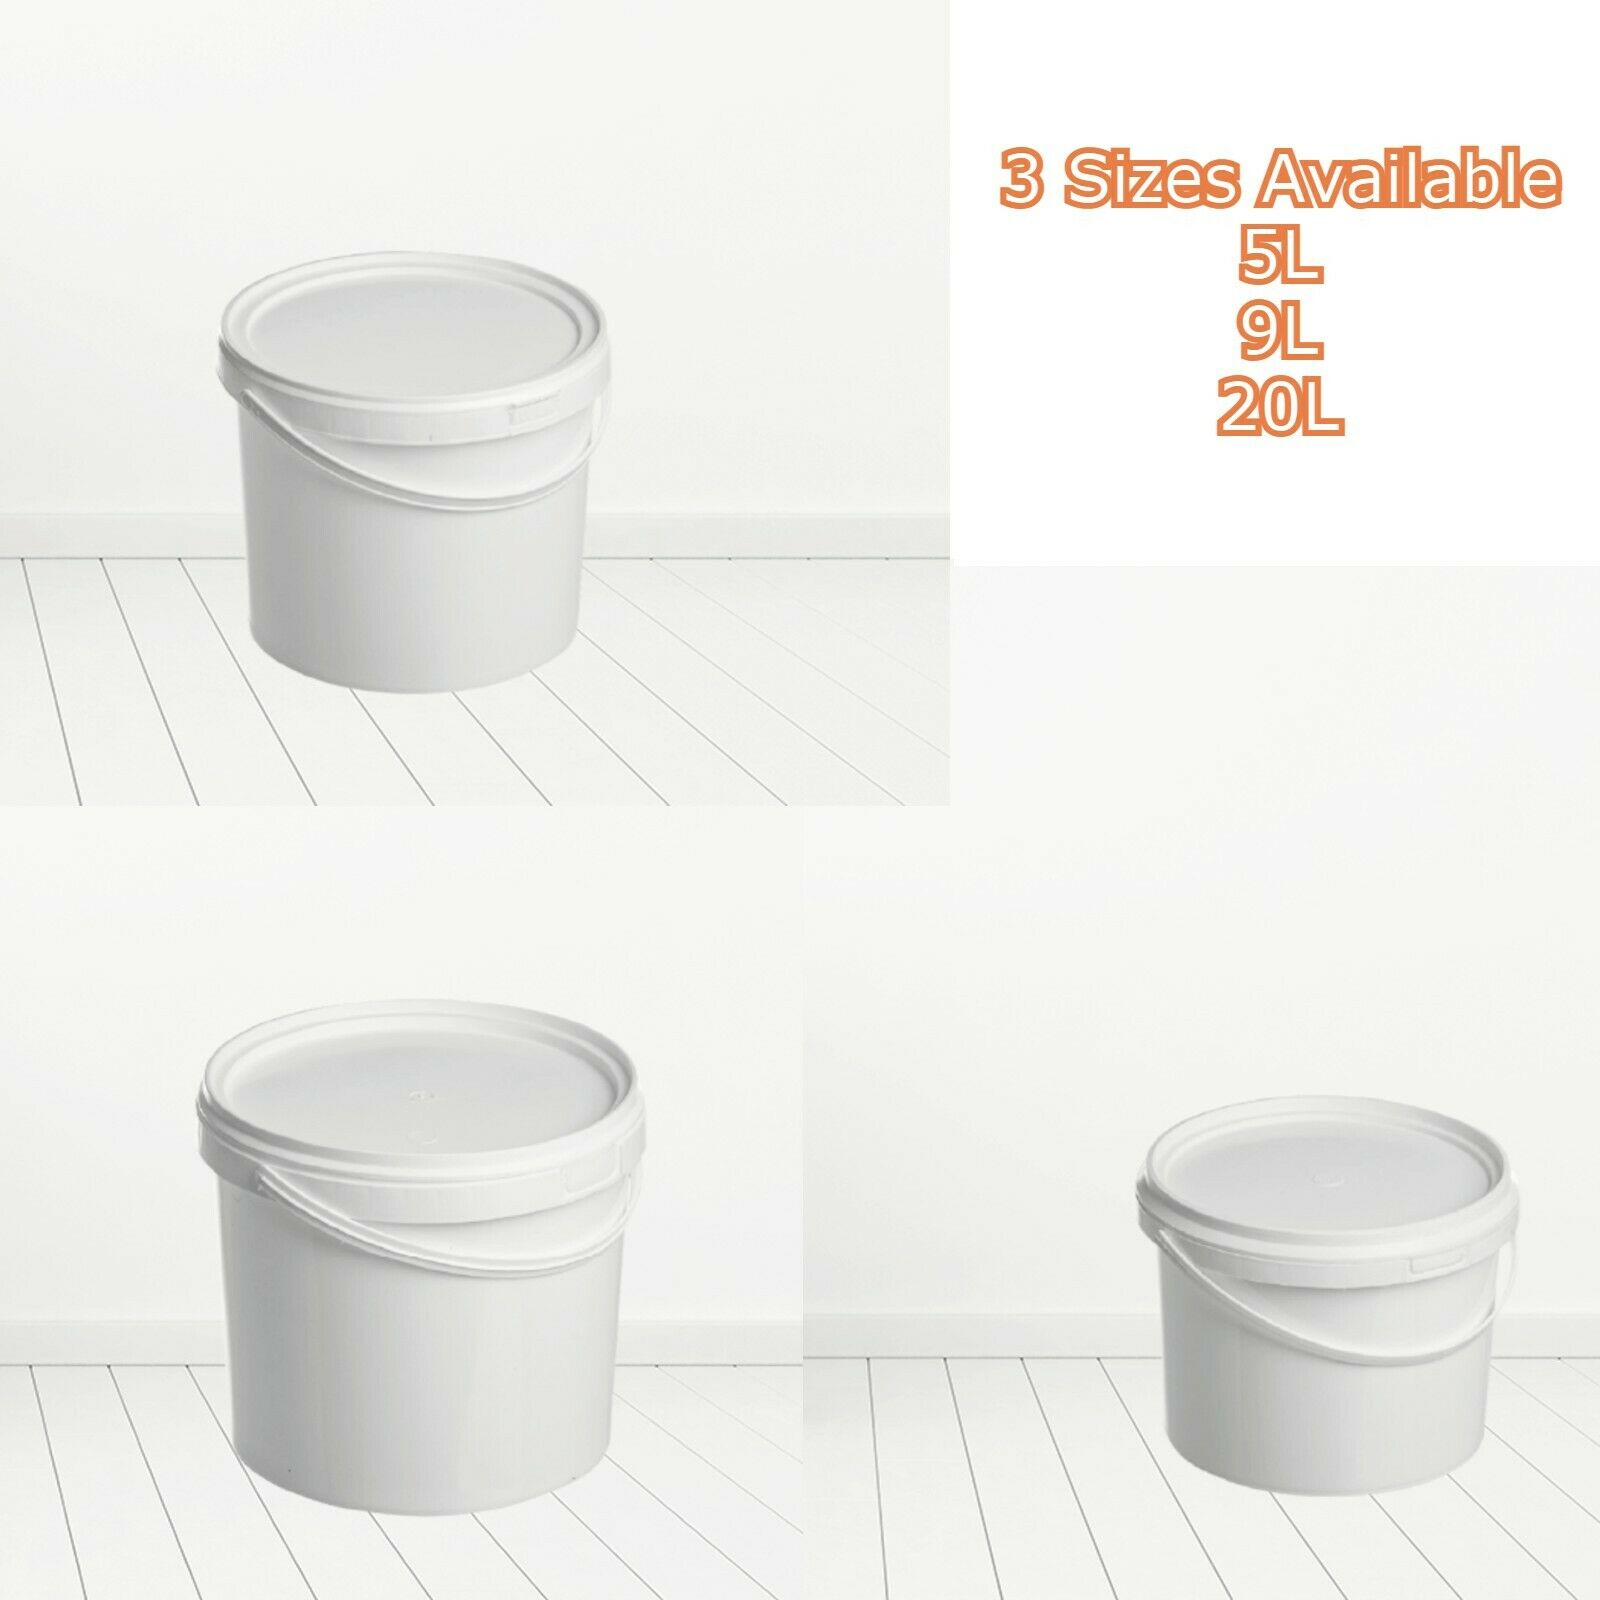 L L L White Plastic Bucket Tub Storage Container with Lid and Handle